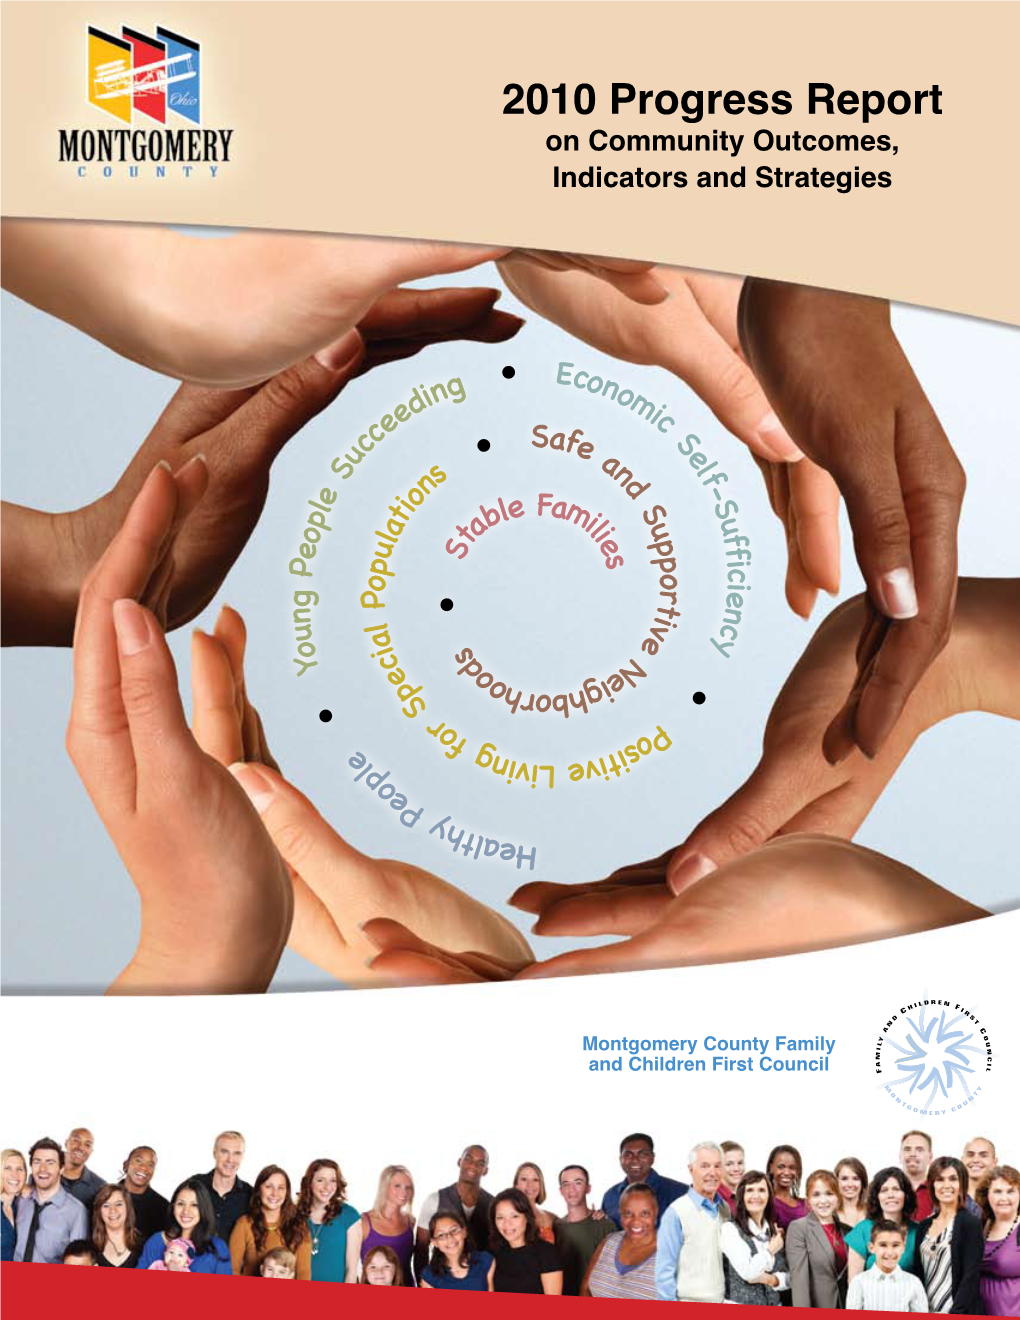 2010 Progress Report on Community Outcomes, Indicators and Strategies